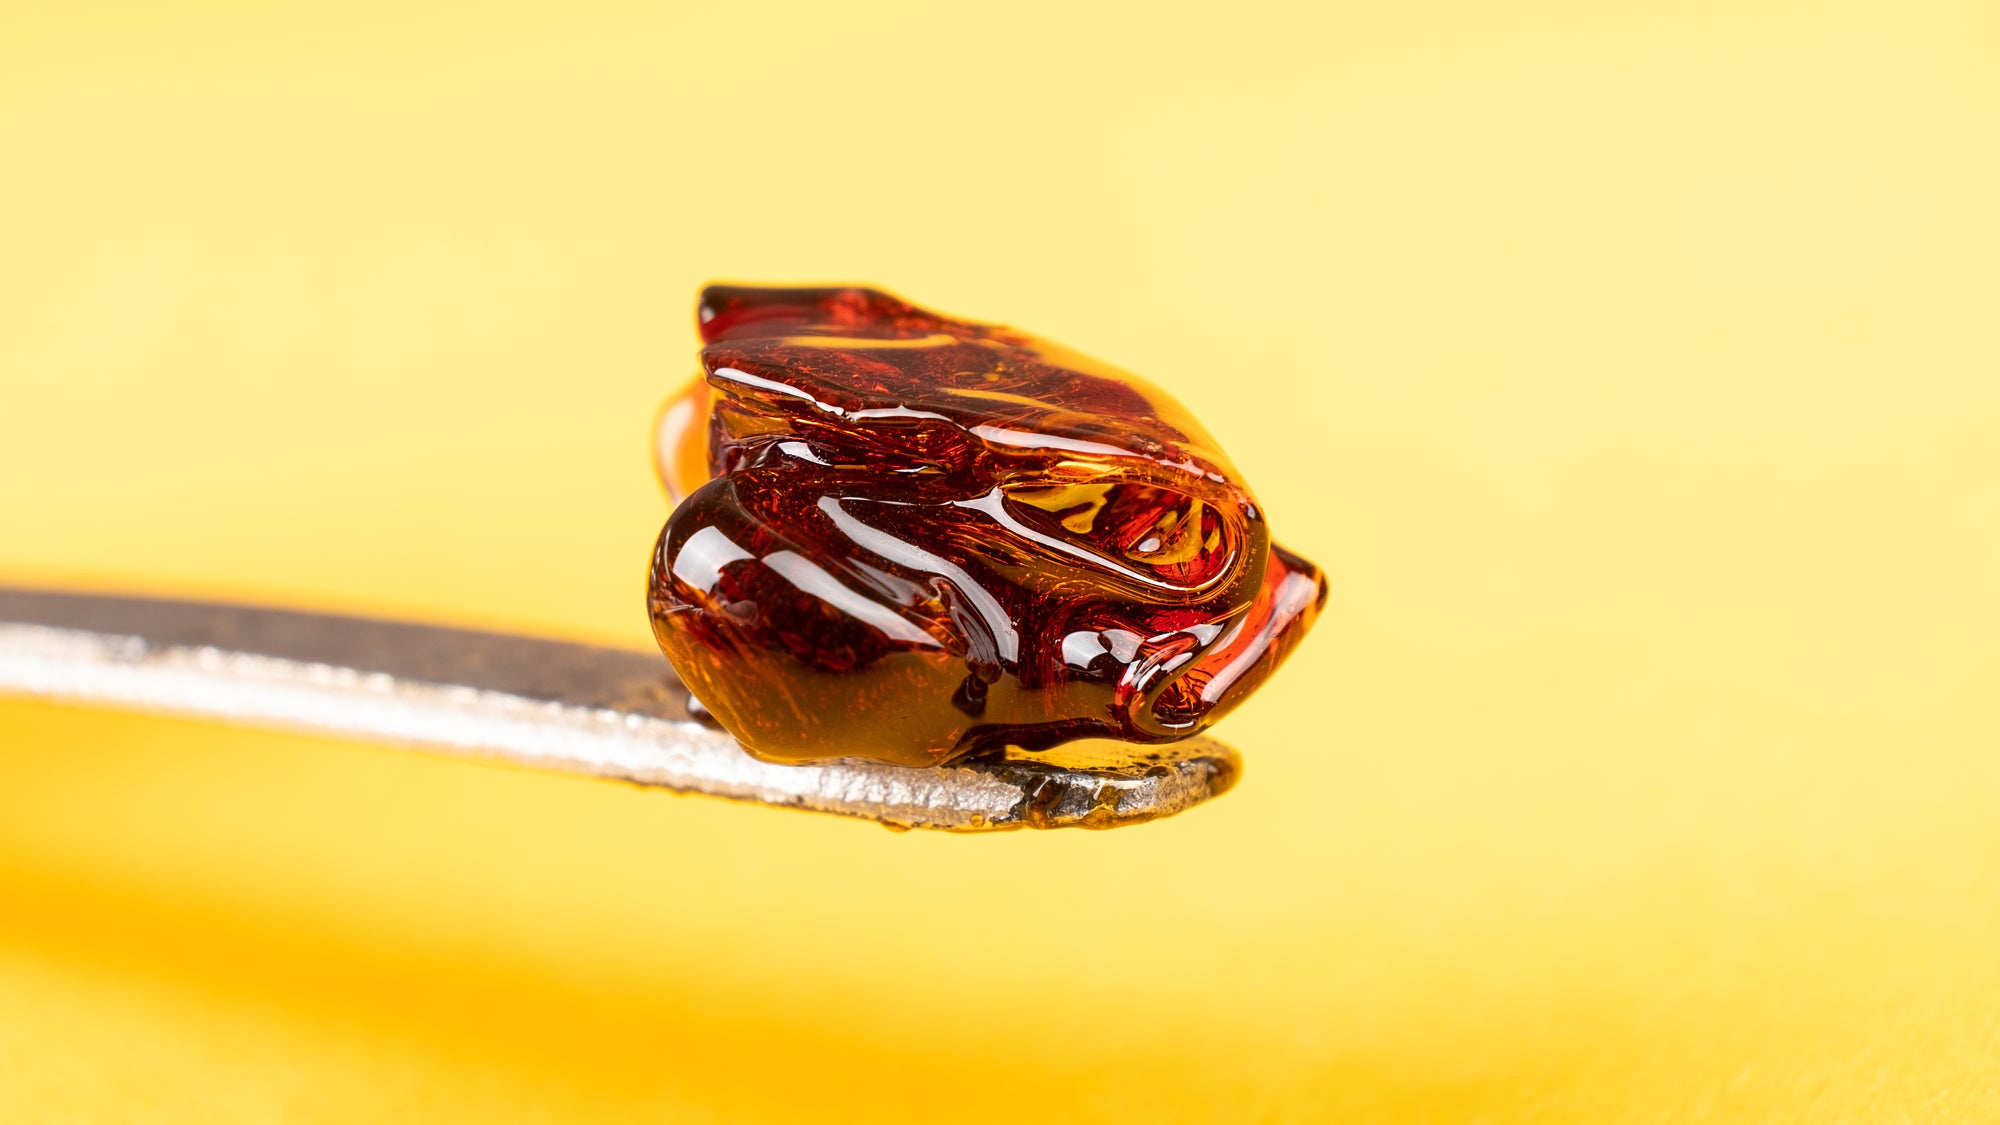 CBD concentrate on a dab tool